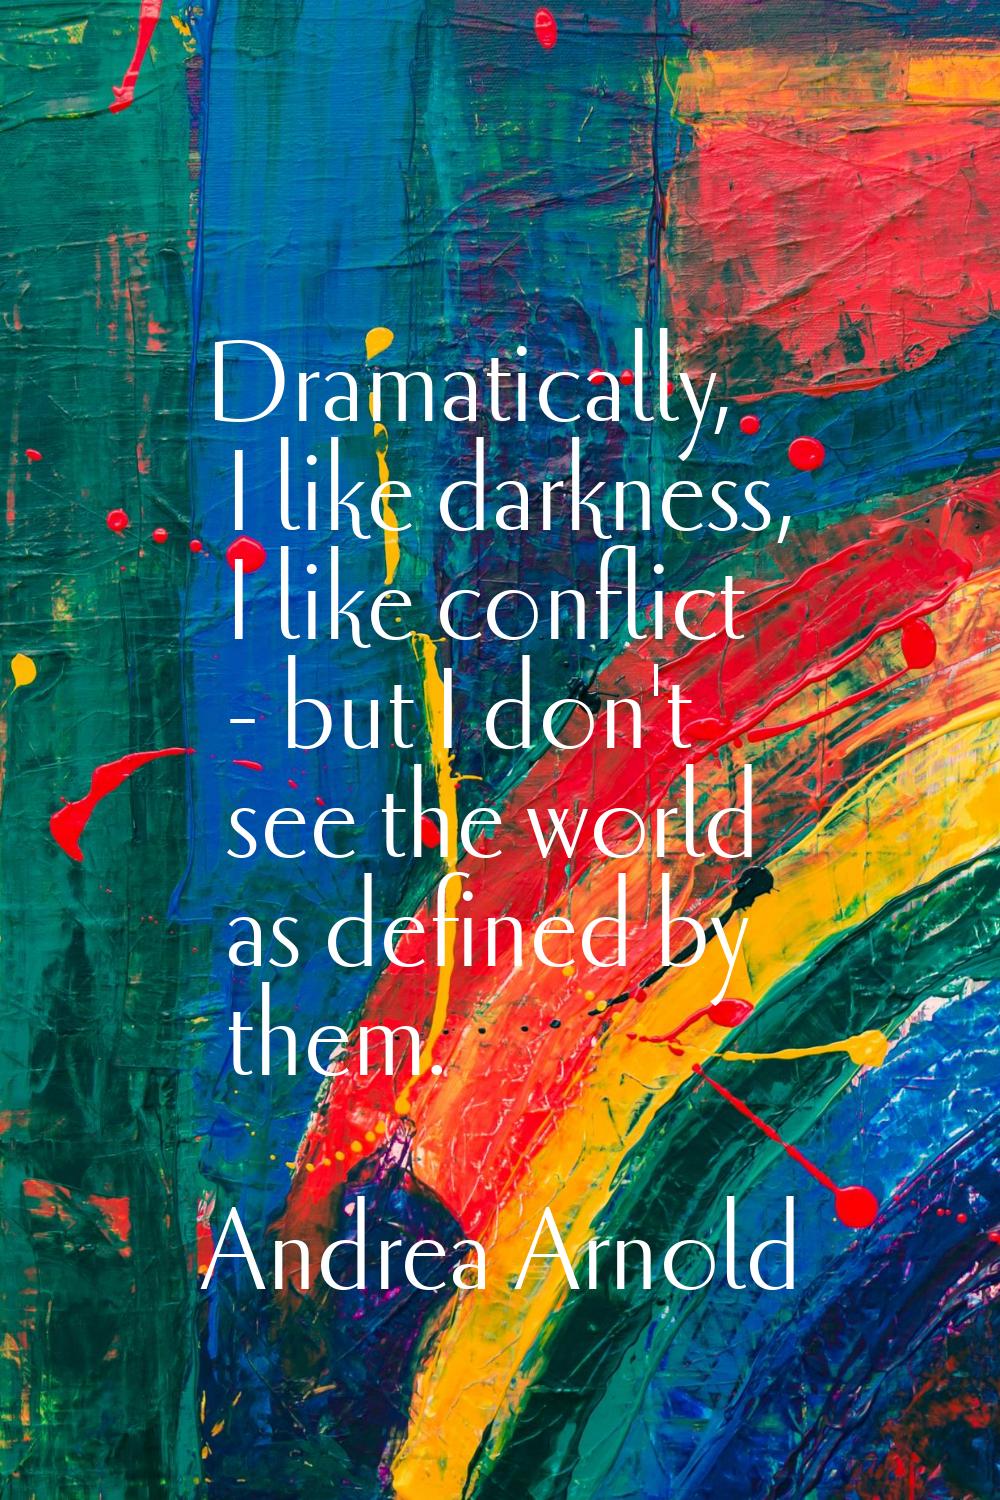 Dramatically, I like darkness, I like conflict - but I don't see the world as defined by them.